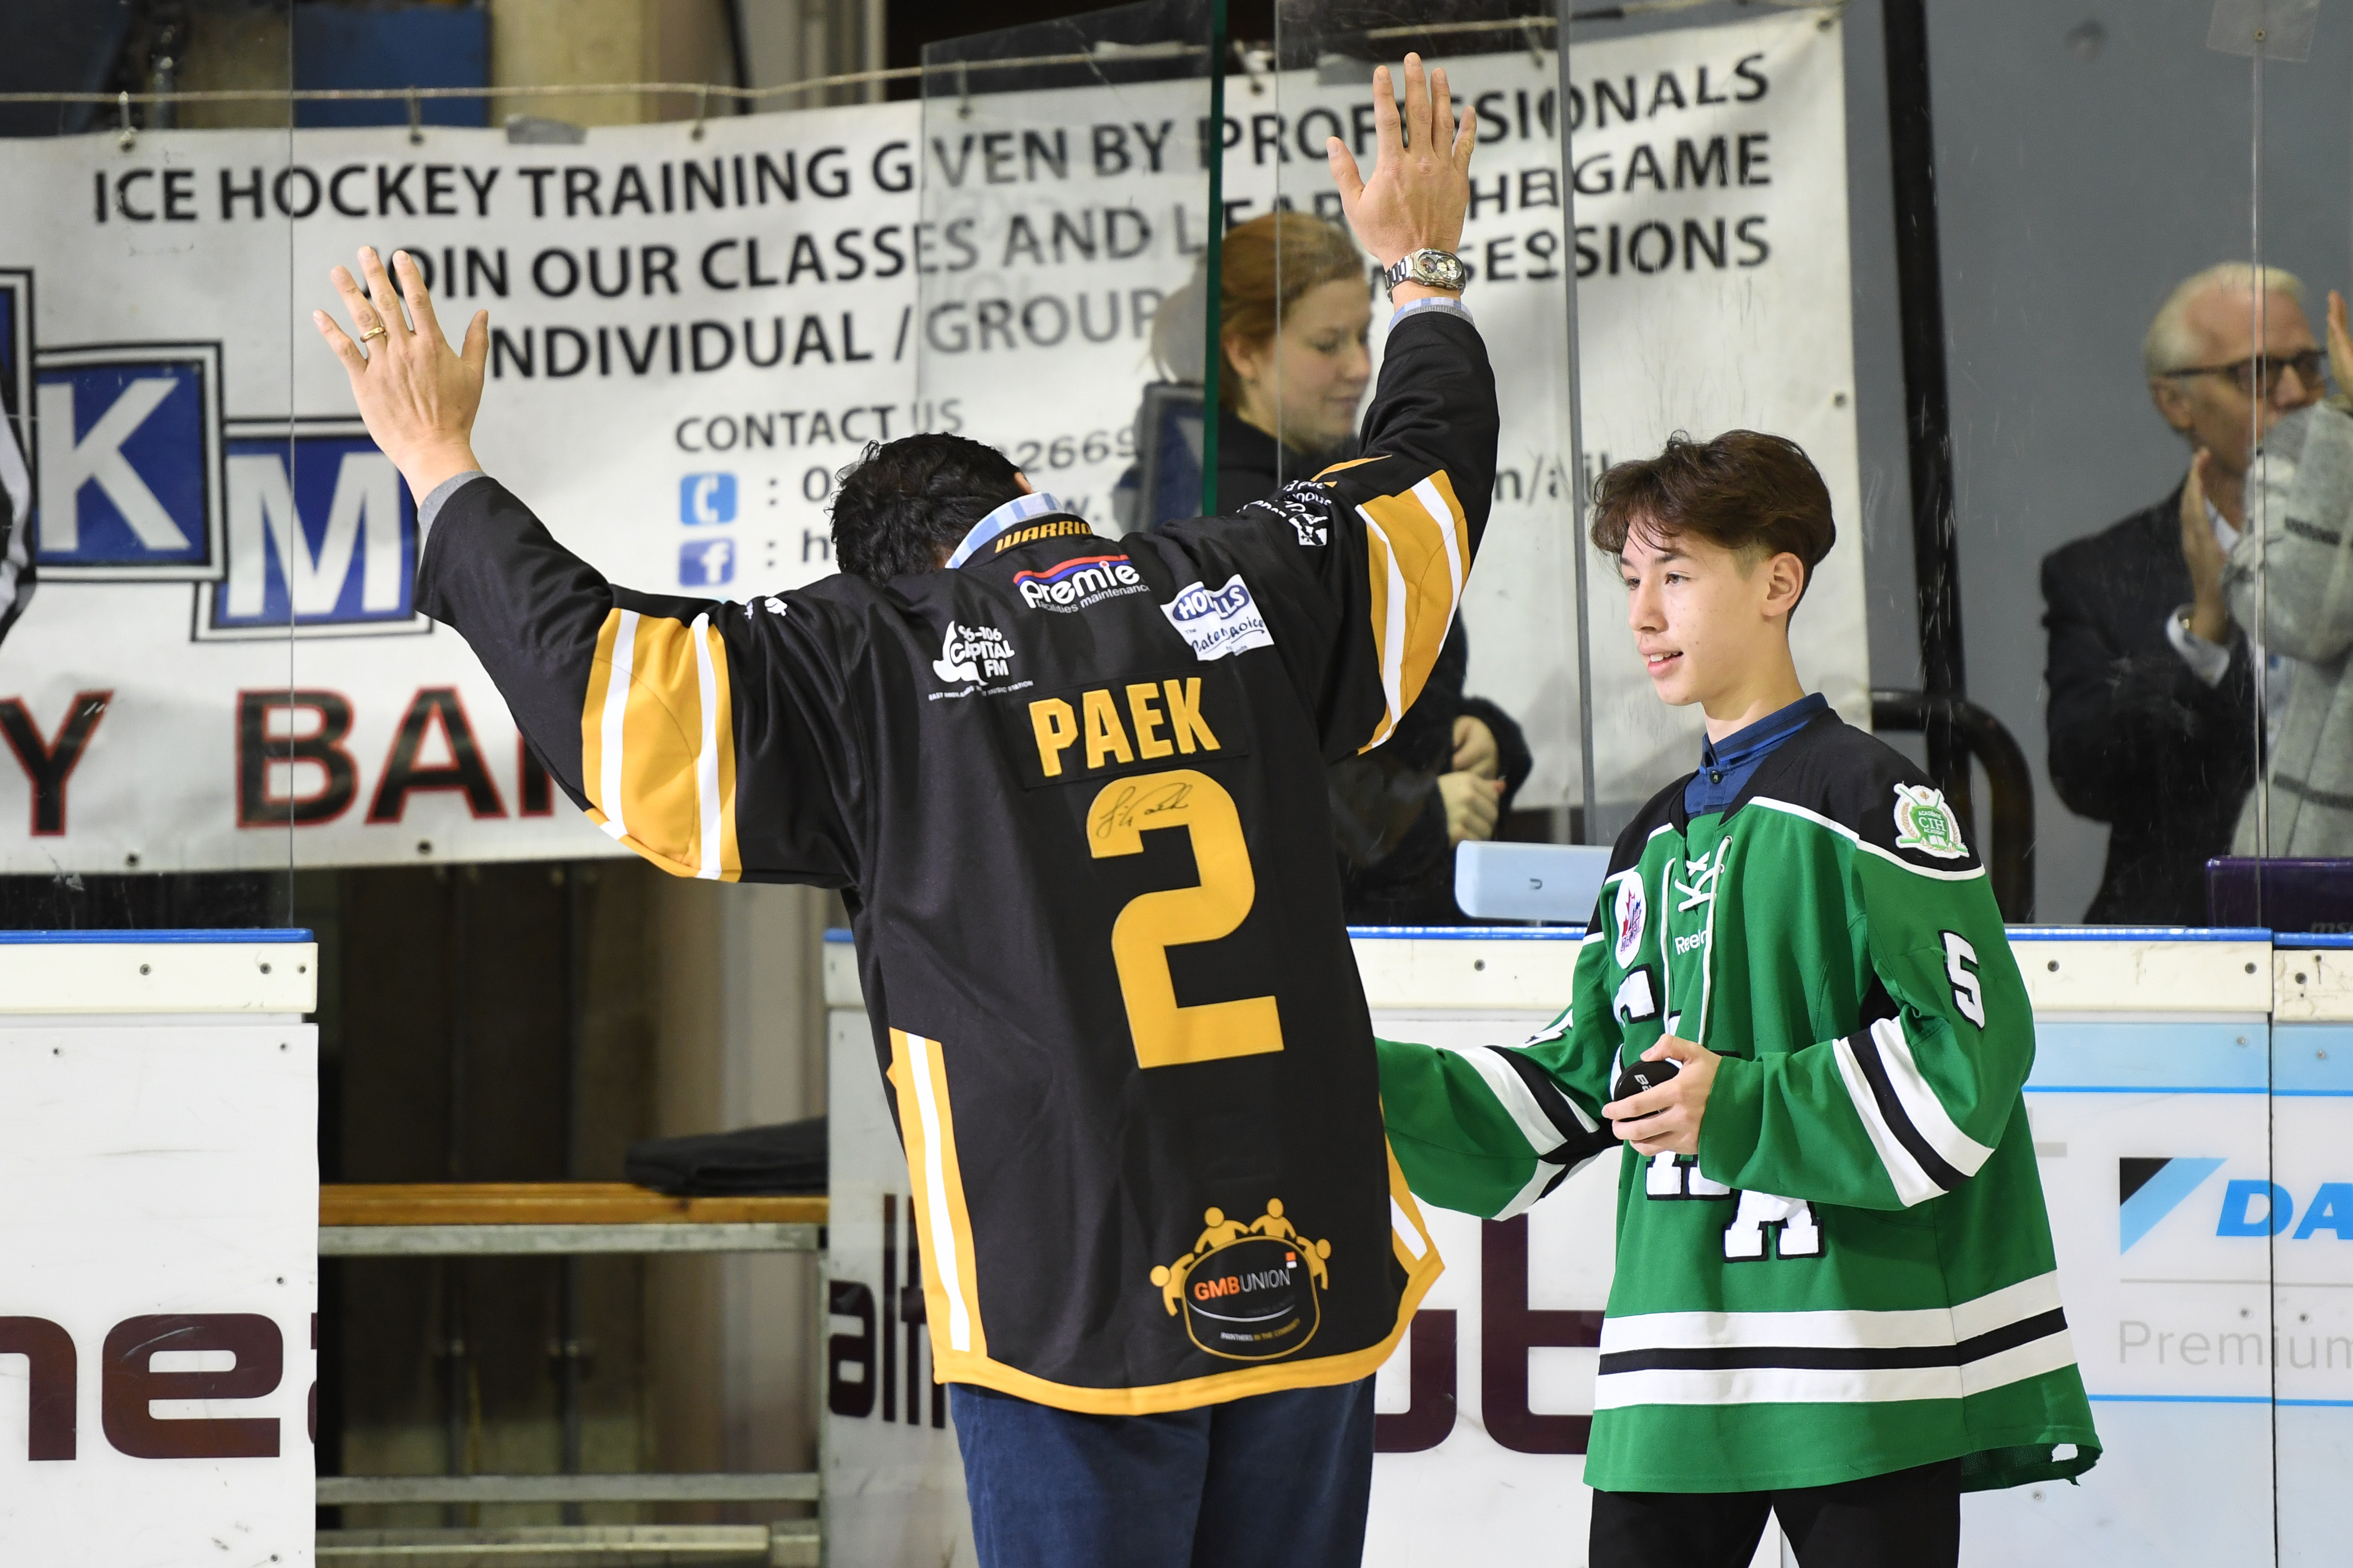 Jimmy Paek jersey auction ends Top Image